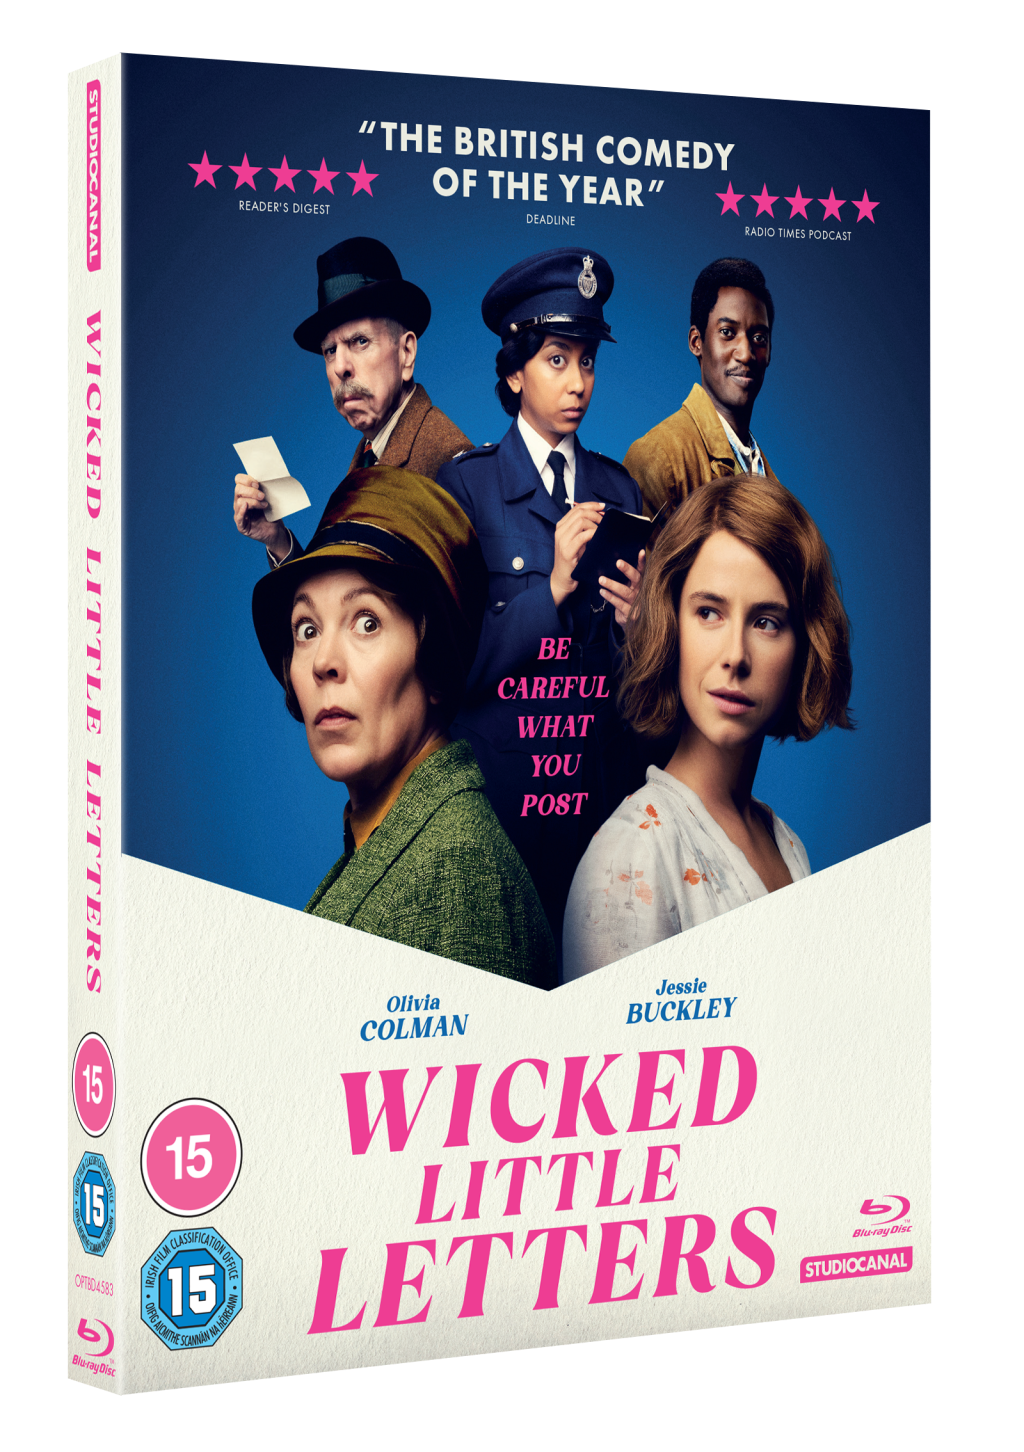 Home Premiere release for Wicked Little Letters starring Olivia Colman and Jessie Buckley from STUDIOCANAL